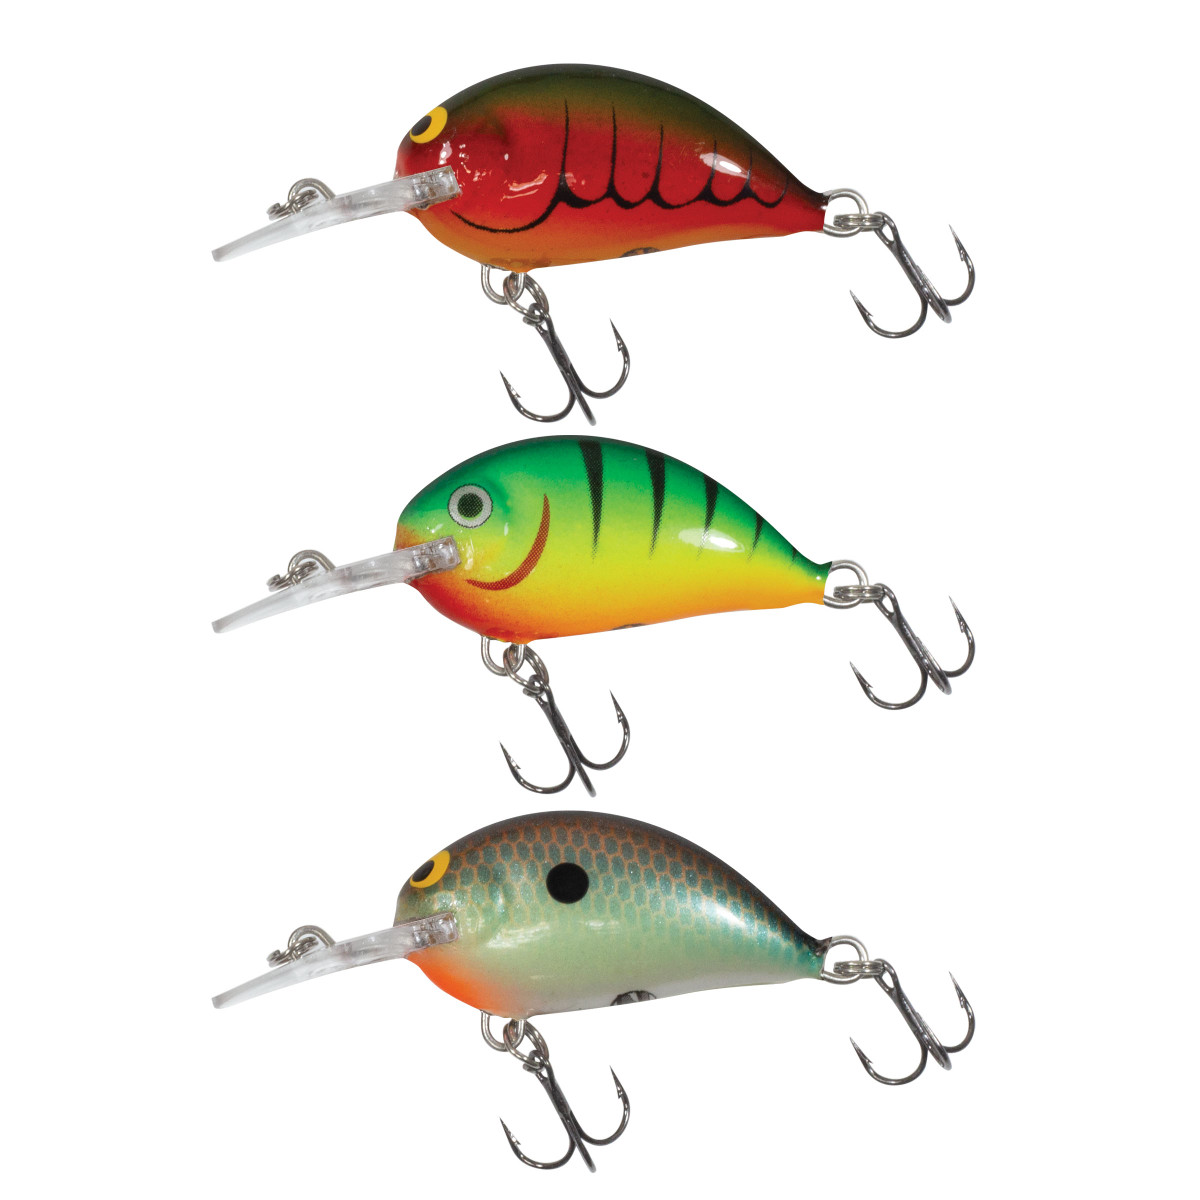 The Northland Rumble Bug Is a Walleye Magnet - The Fishing Wire